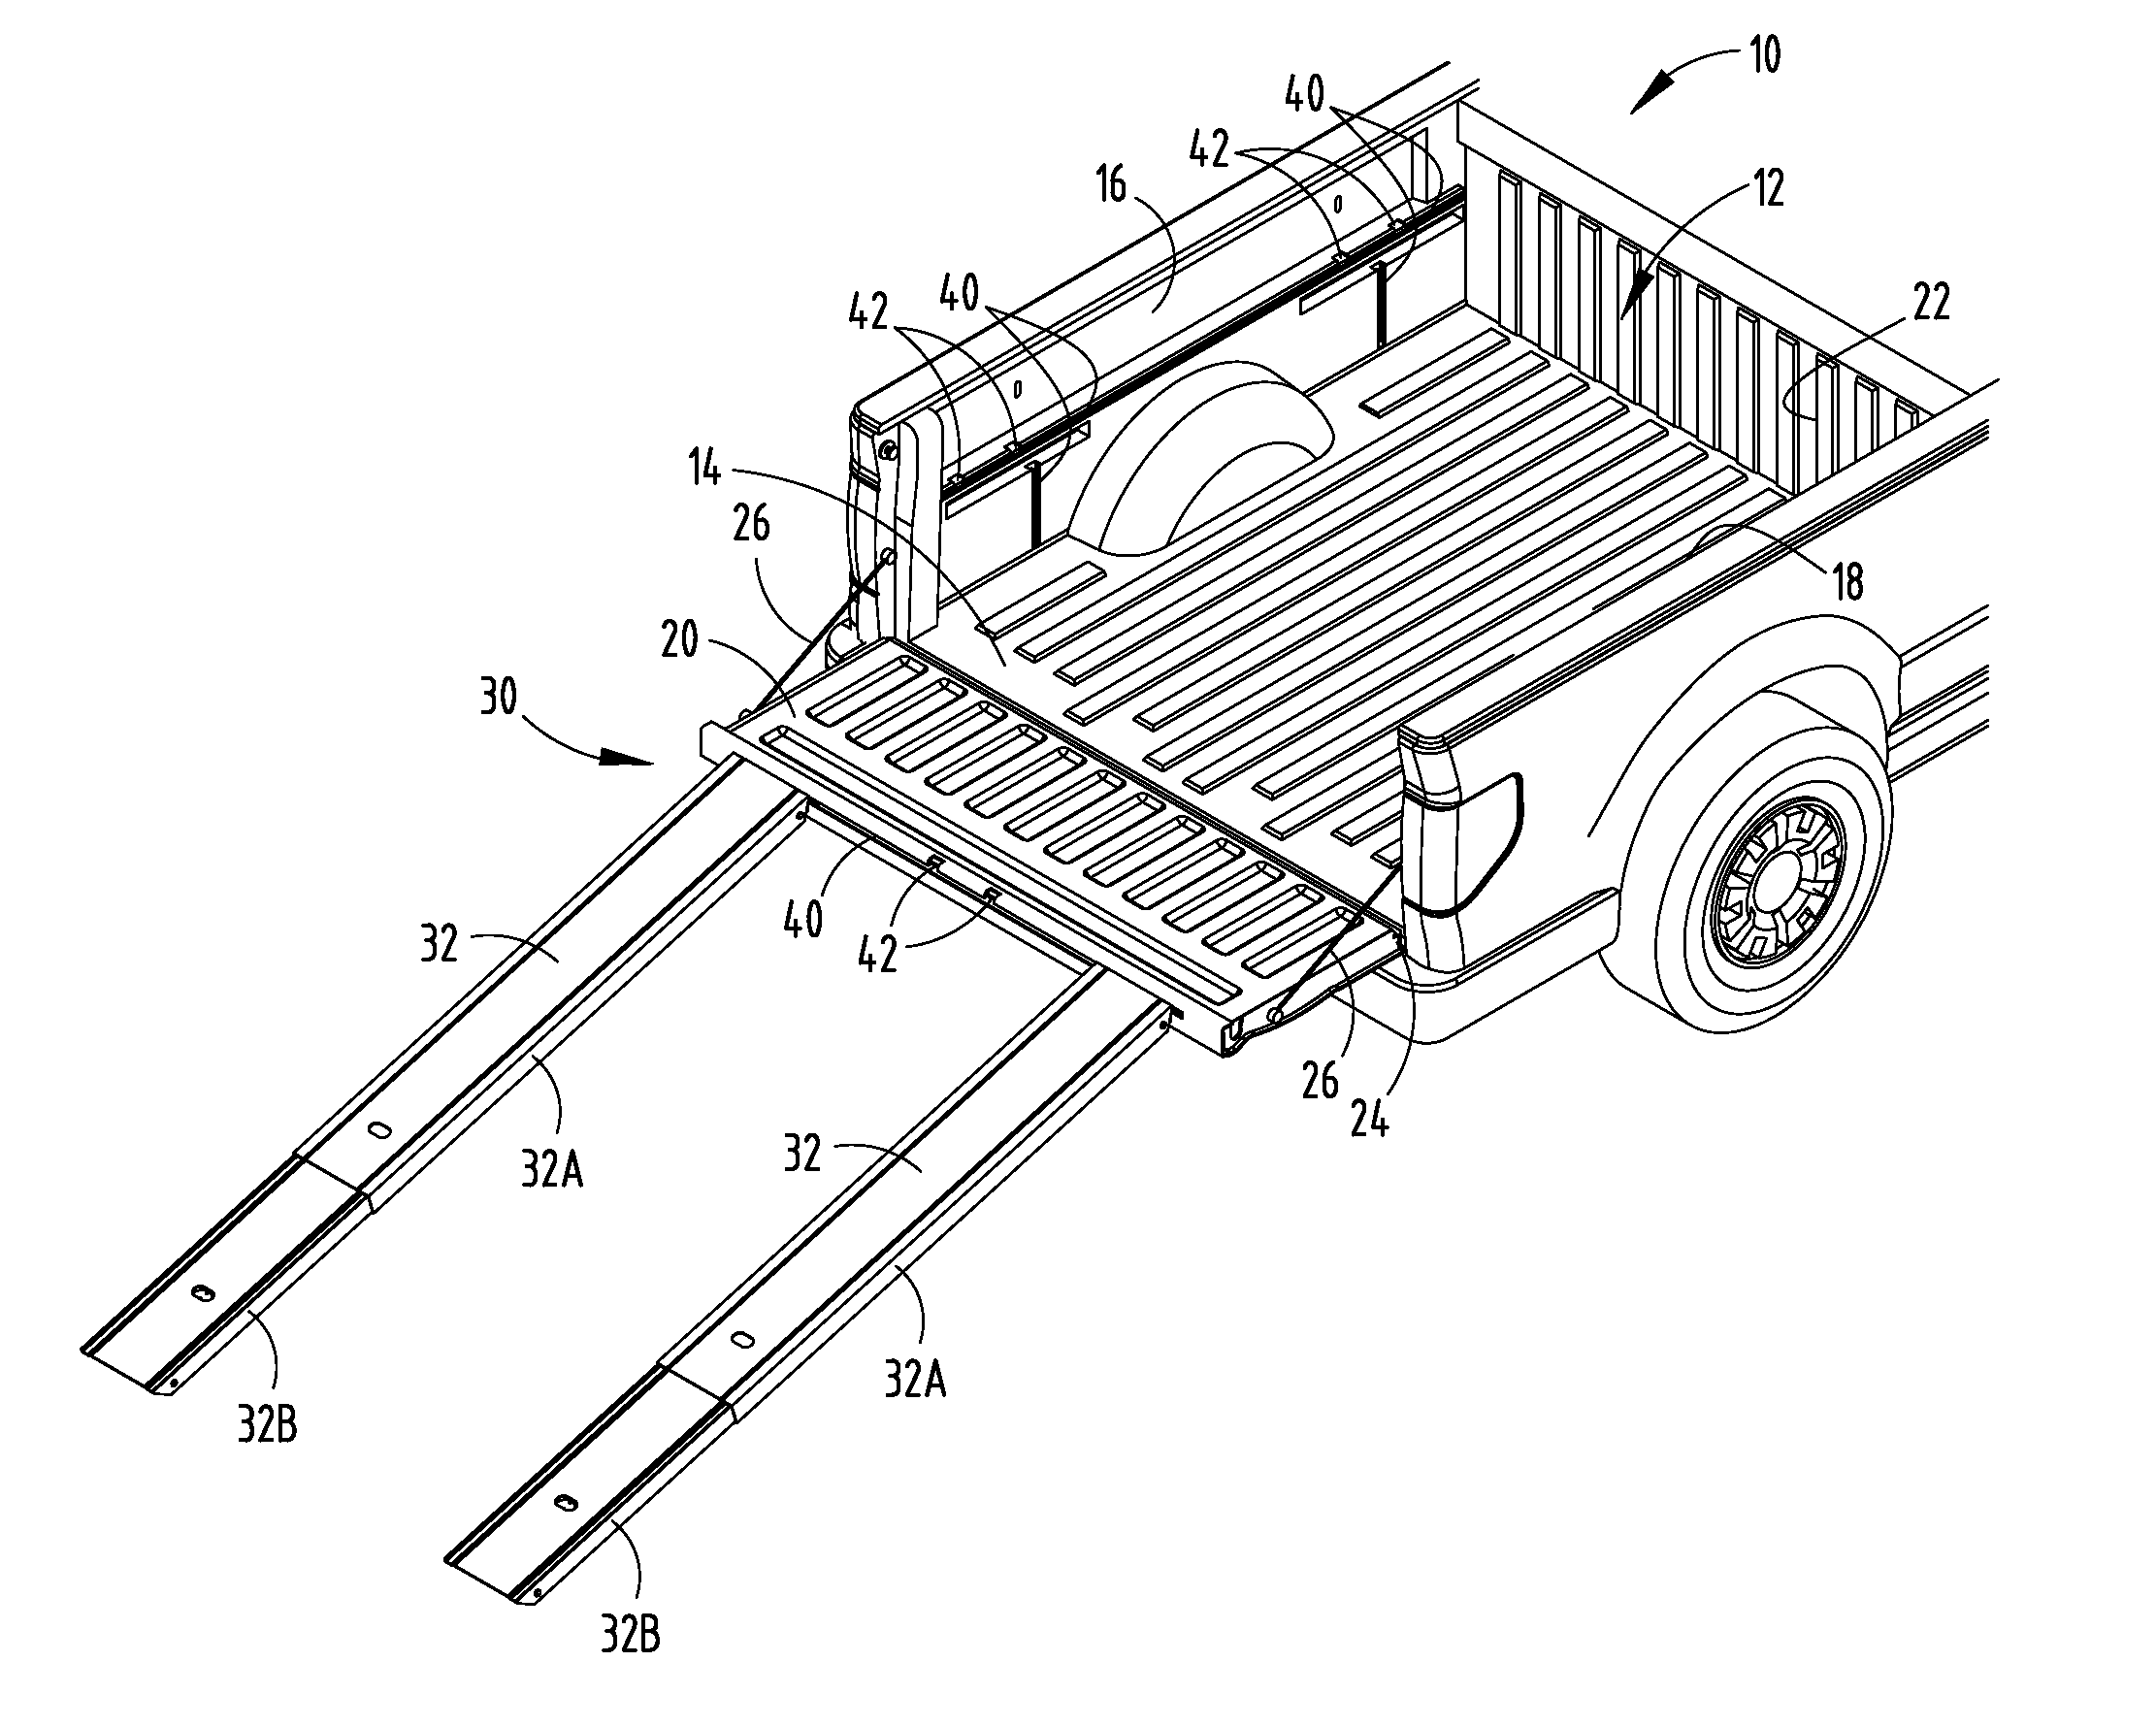 Cargo box extension assembly for vehicle